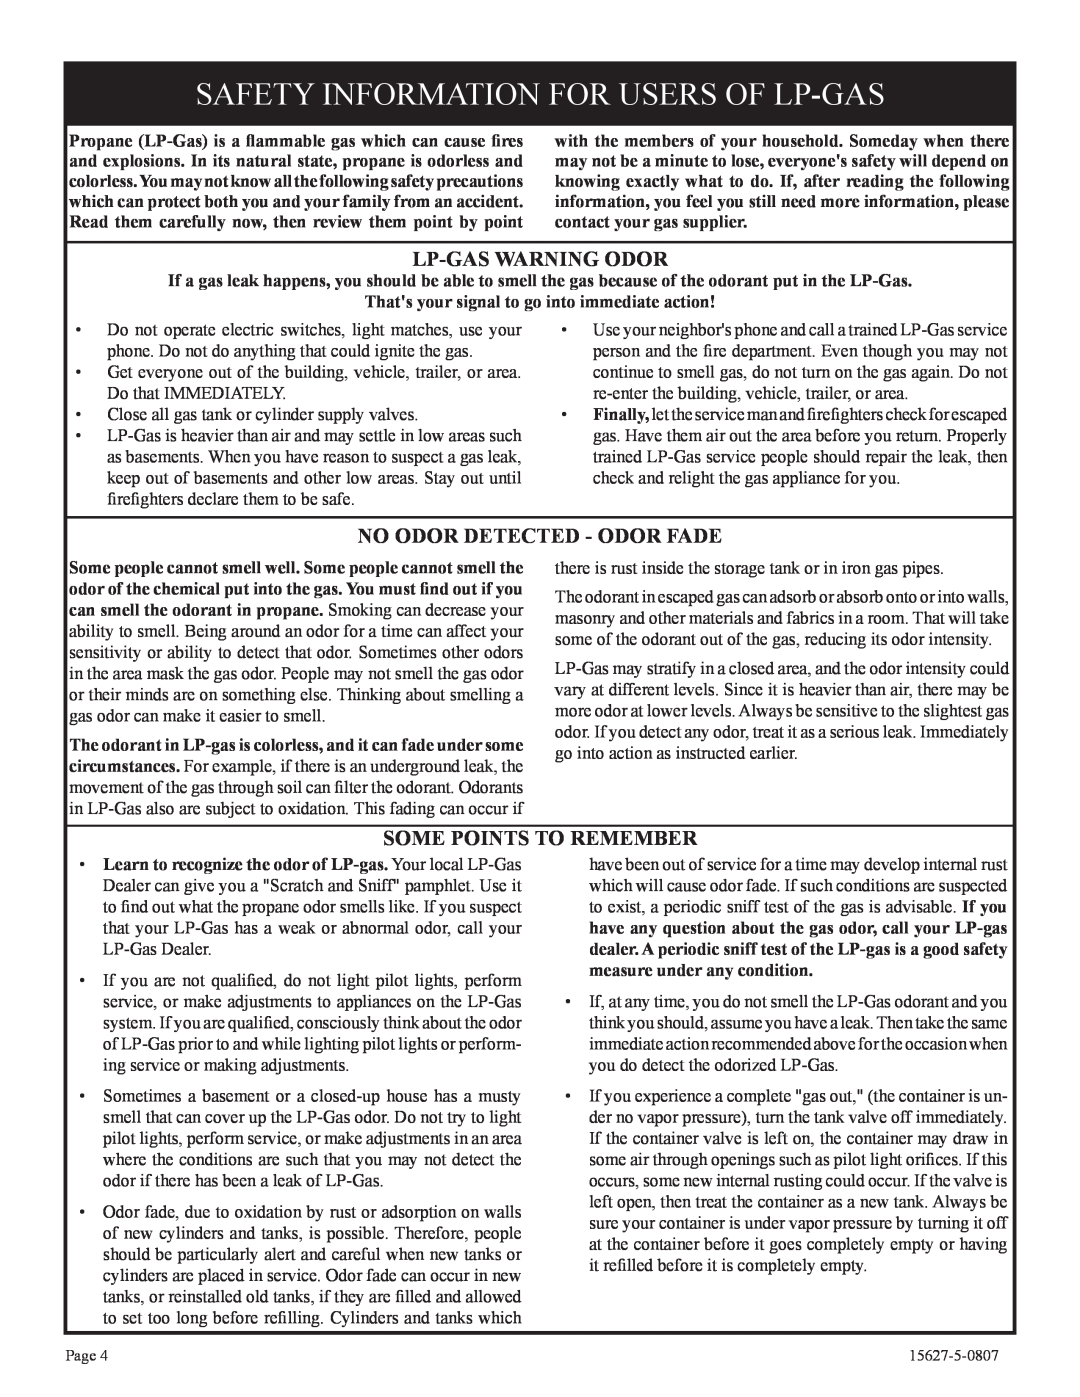 Empire Comfort Systems CIBV-30-20 Safety Information For Users Of Lp-Gas, Lp-Gas Warning Odor, Some Points To Remember 